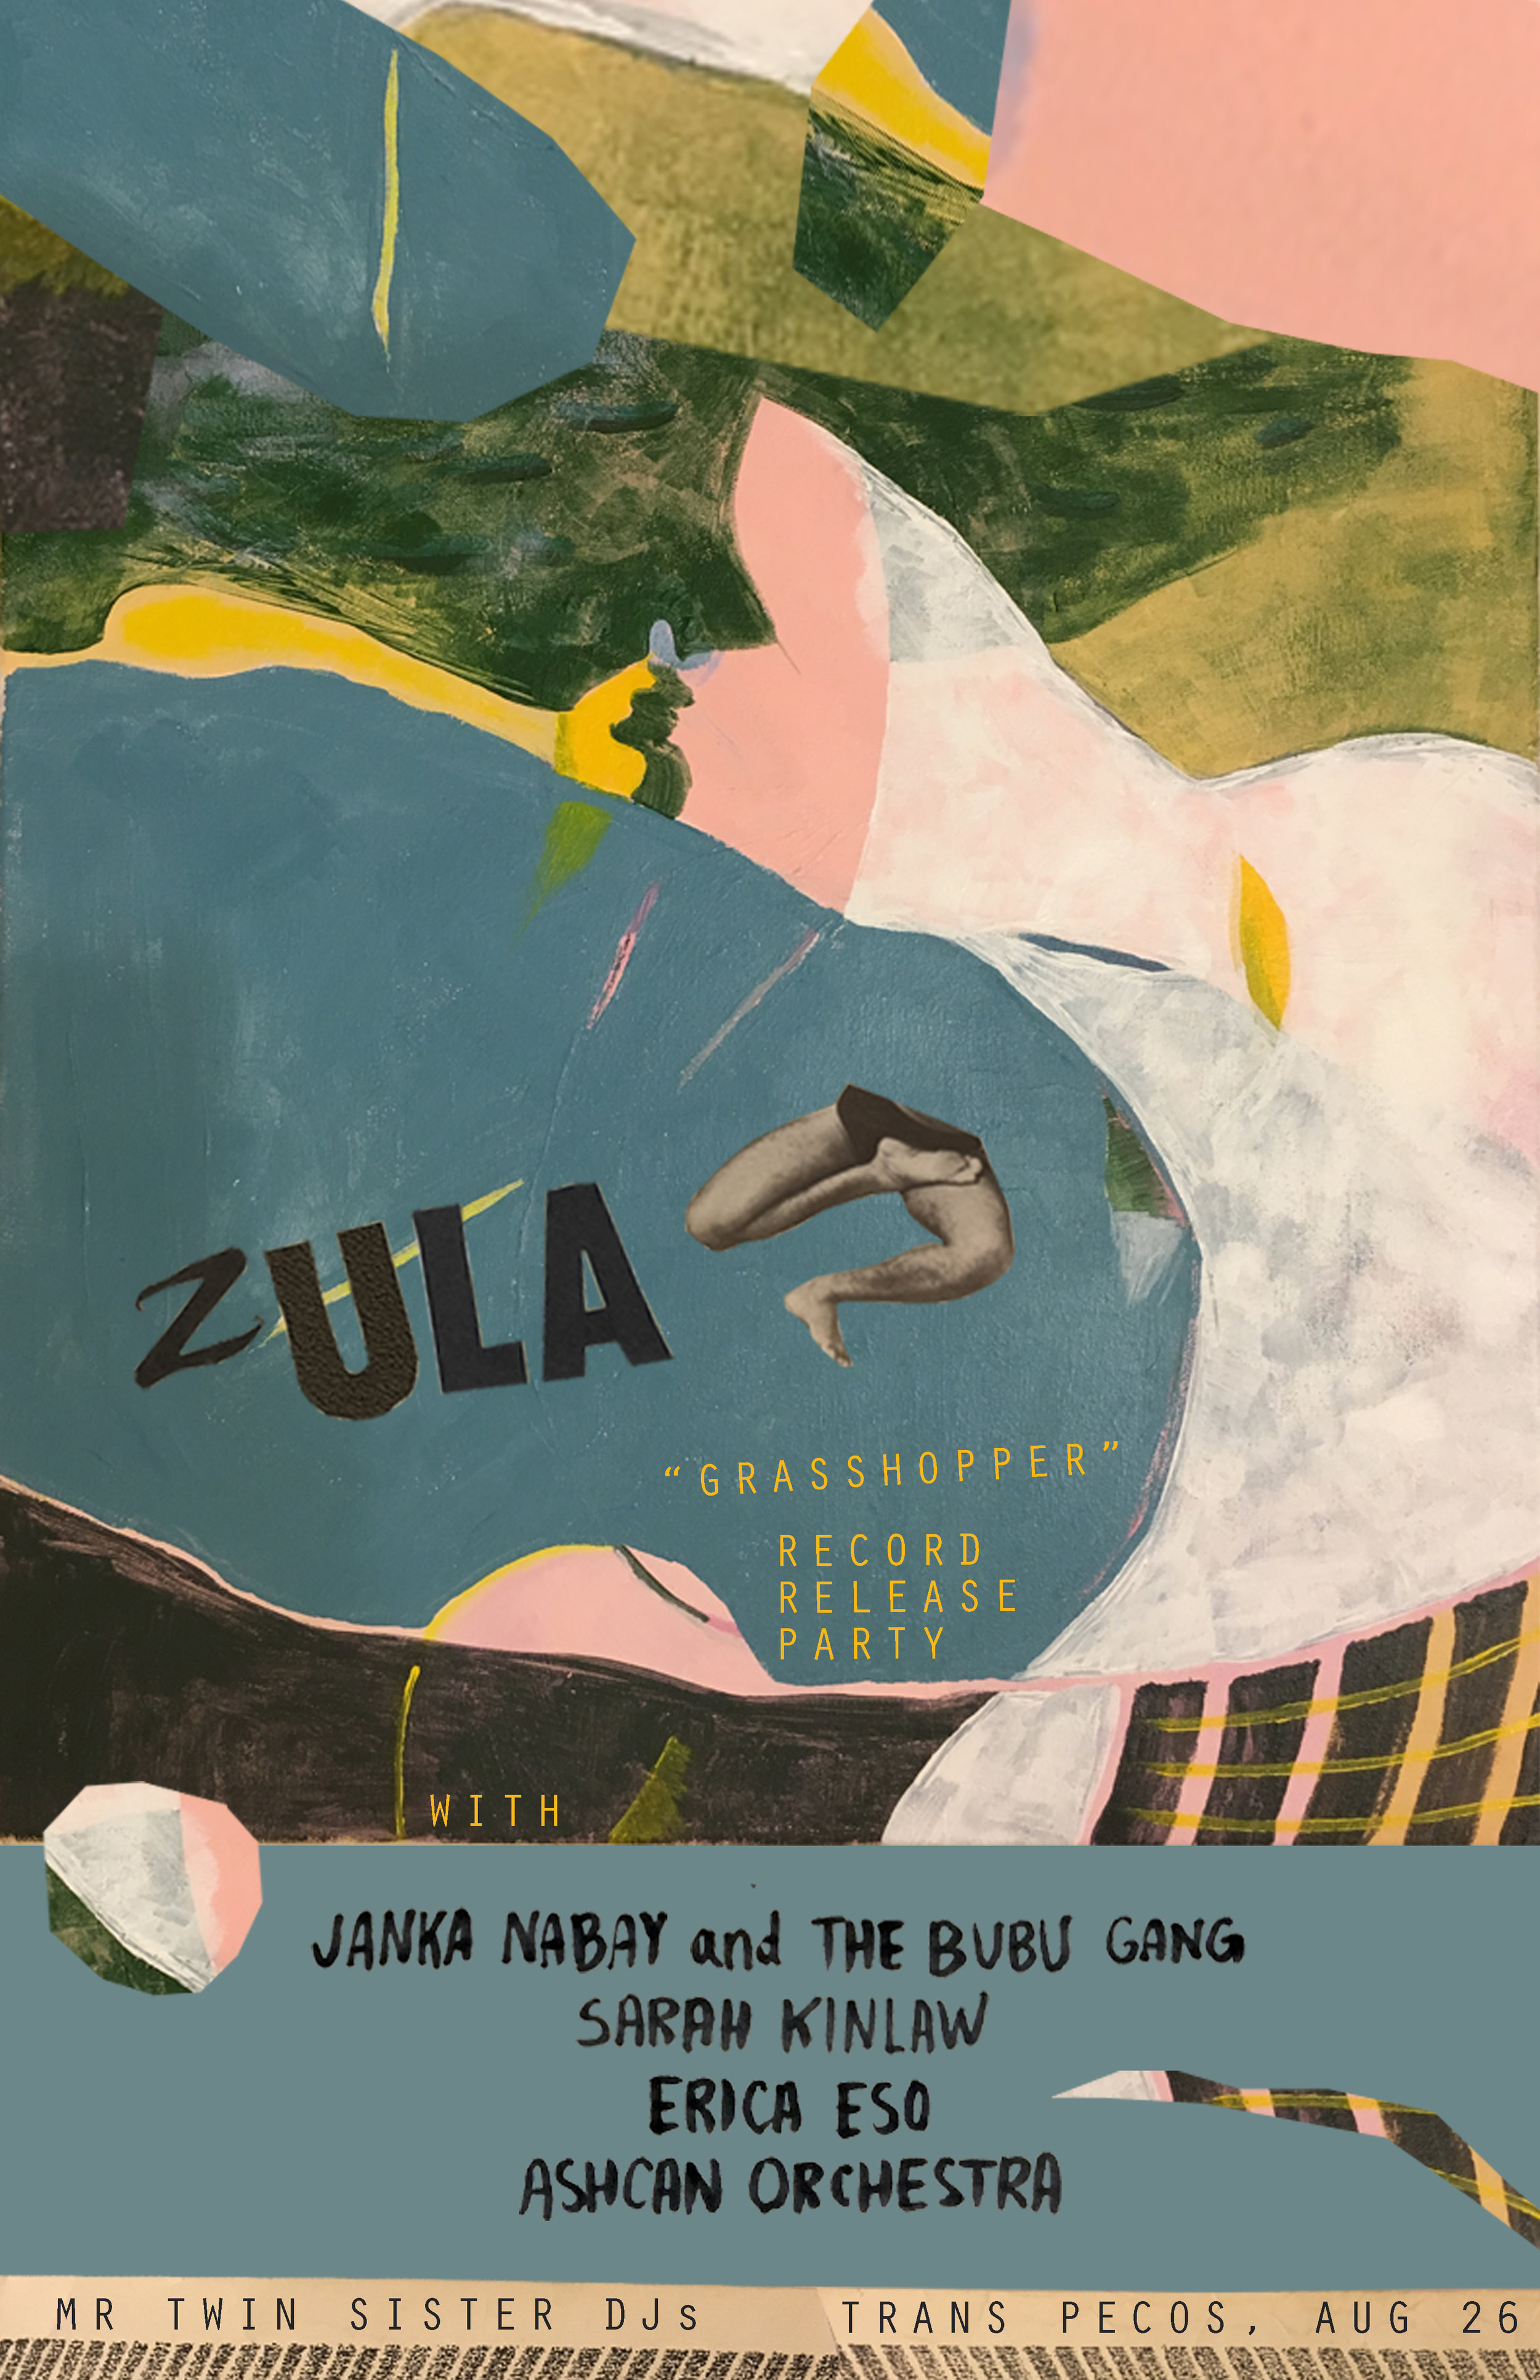  show poster, 2016 